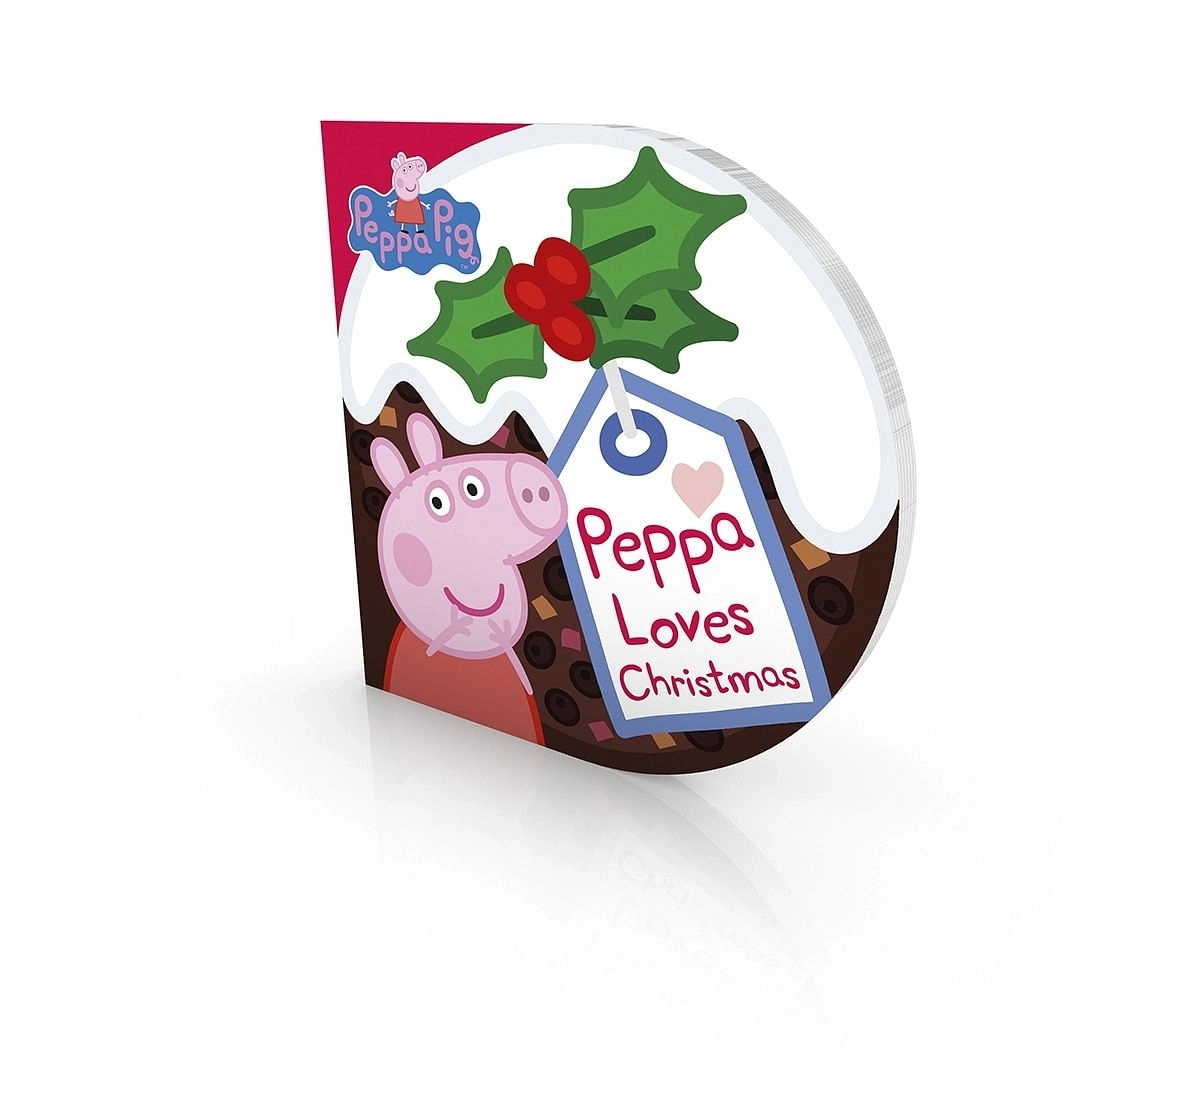 Peppa Loves Christmas, 12 Pages Book by Ladybird, Board Book